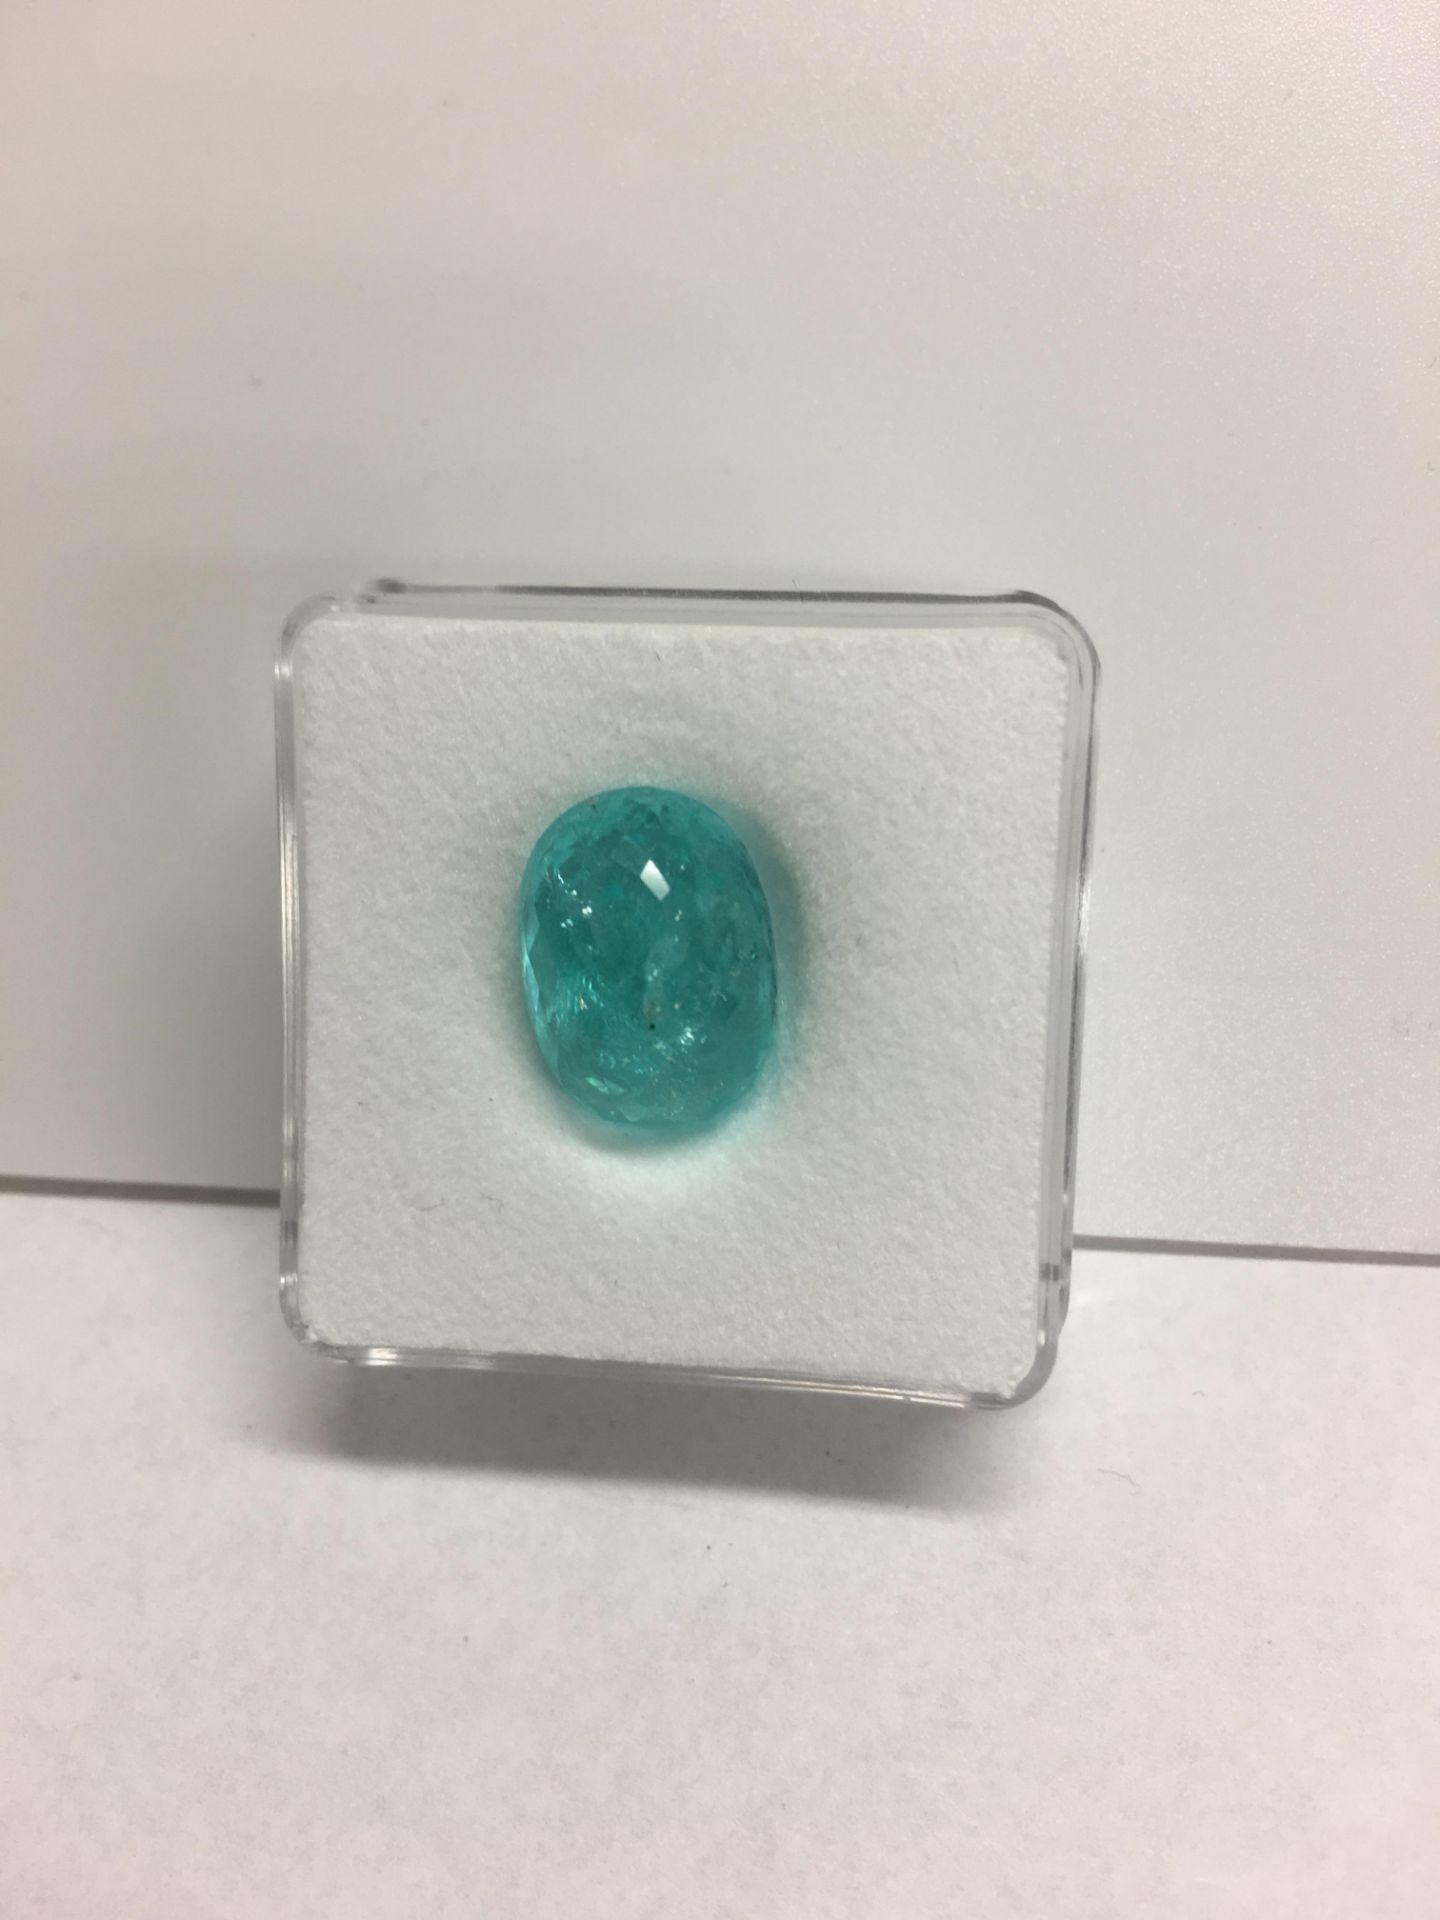 11.05ct Paraiba Tourmaline,16.14mmx 11.44mm x7.87mm,AIGS CERTIFICATION. appriasal 39500 - Image 3 of 5